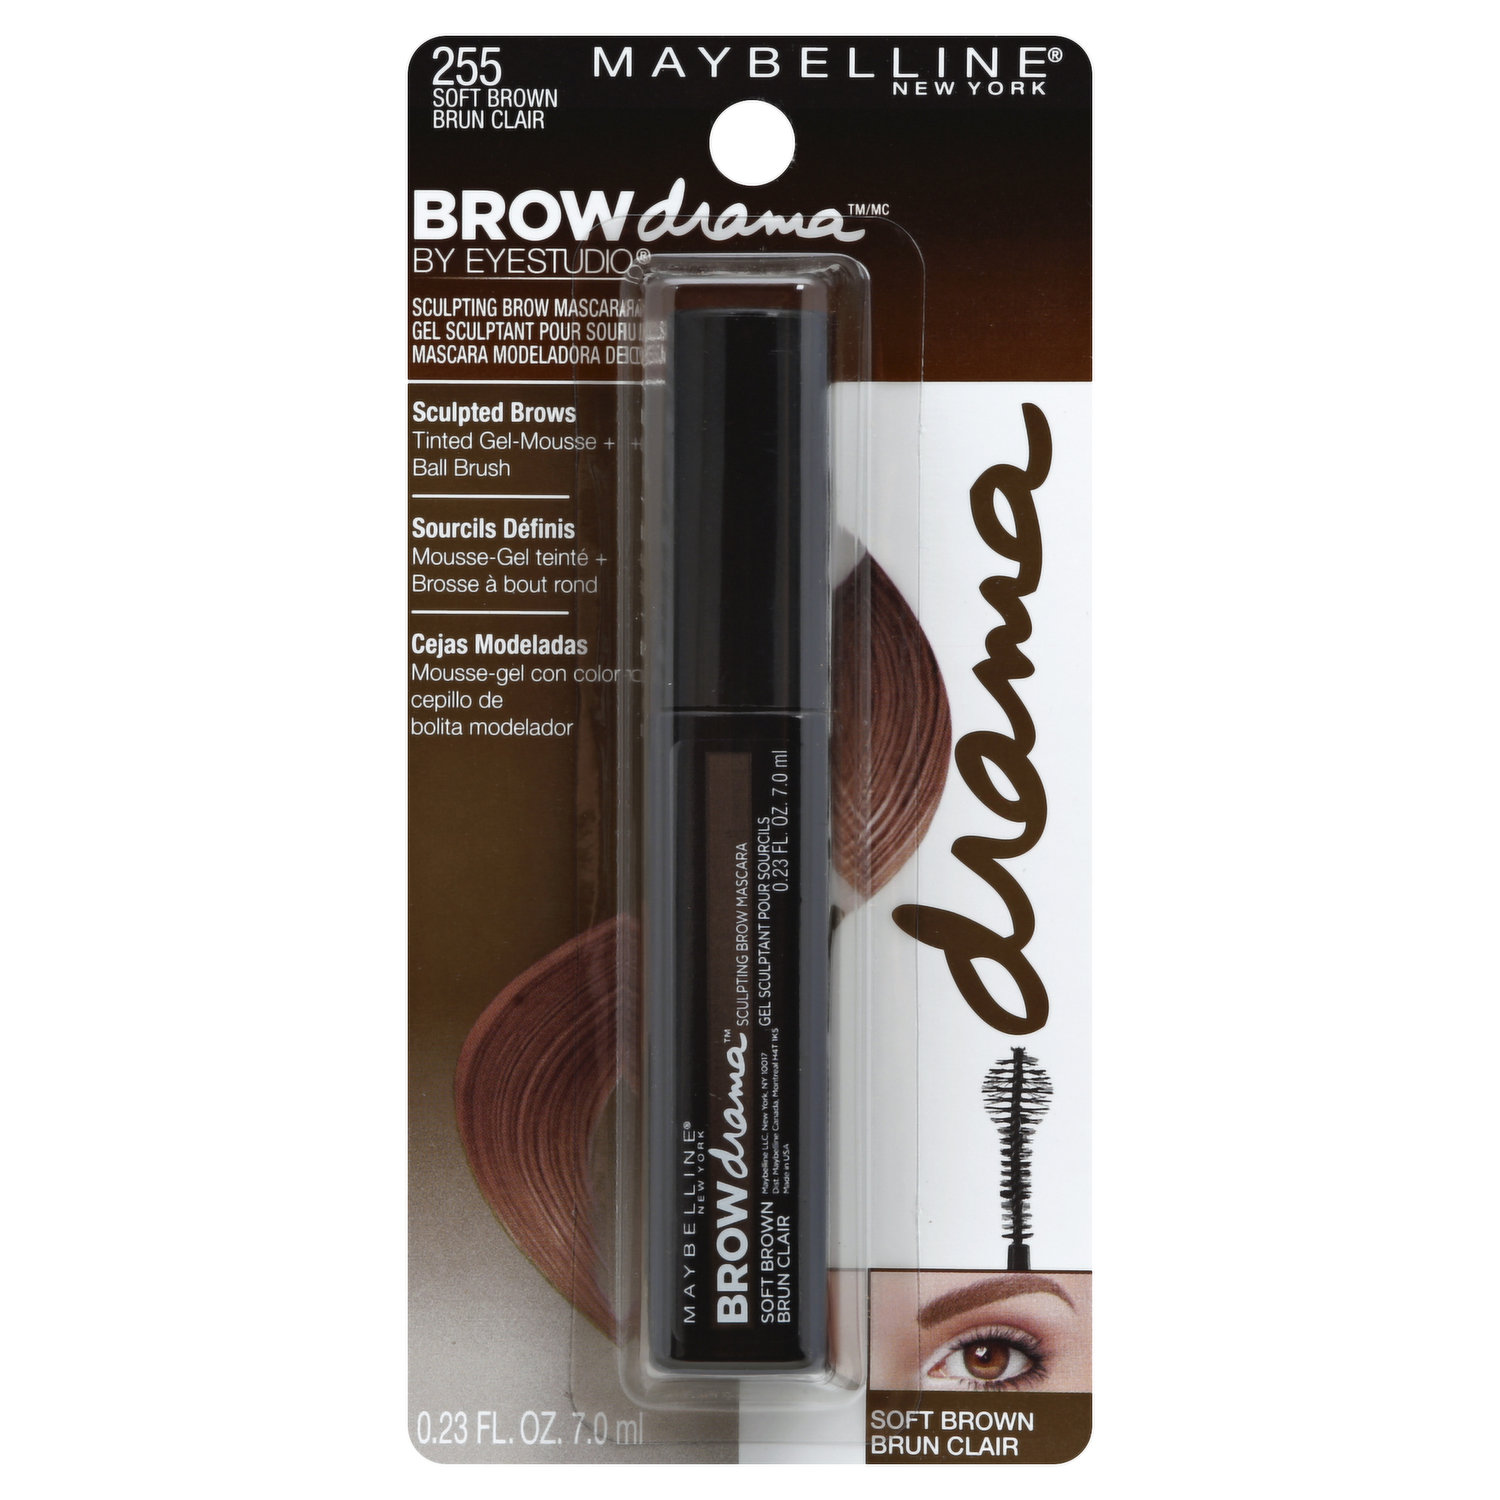 maybelline Mascara, Brown 255